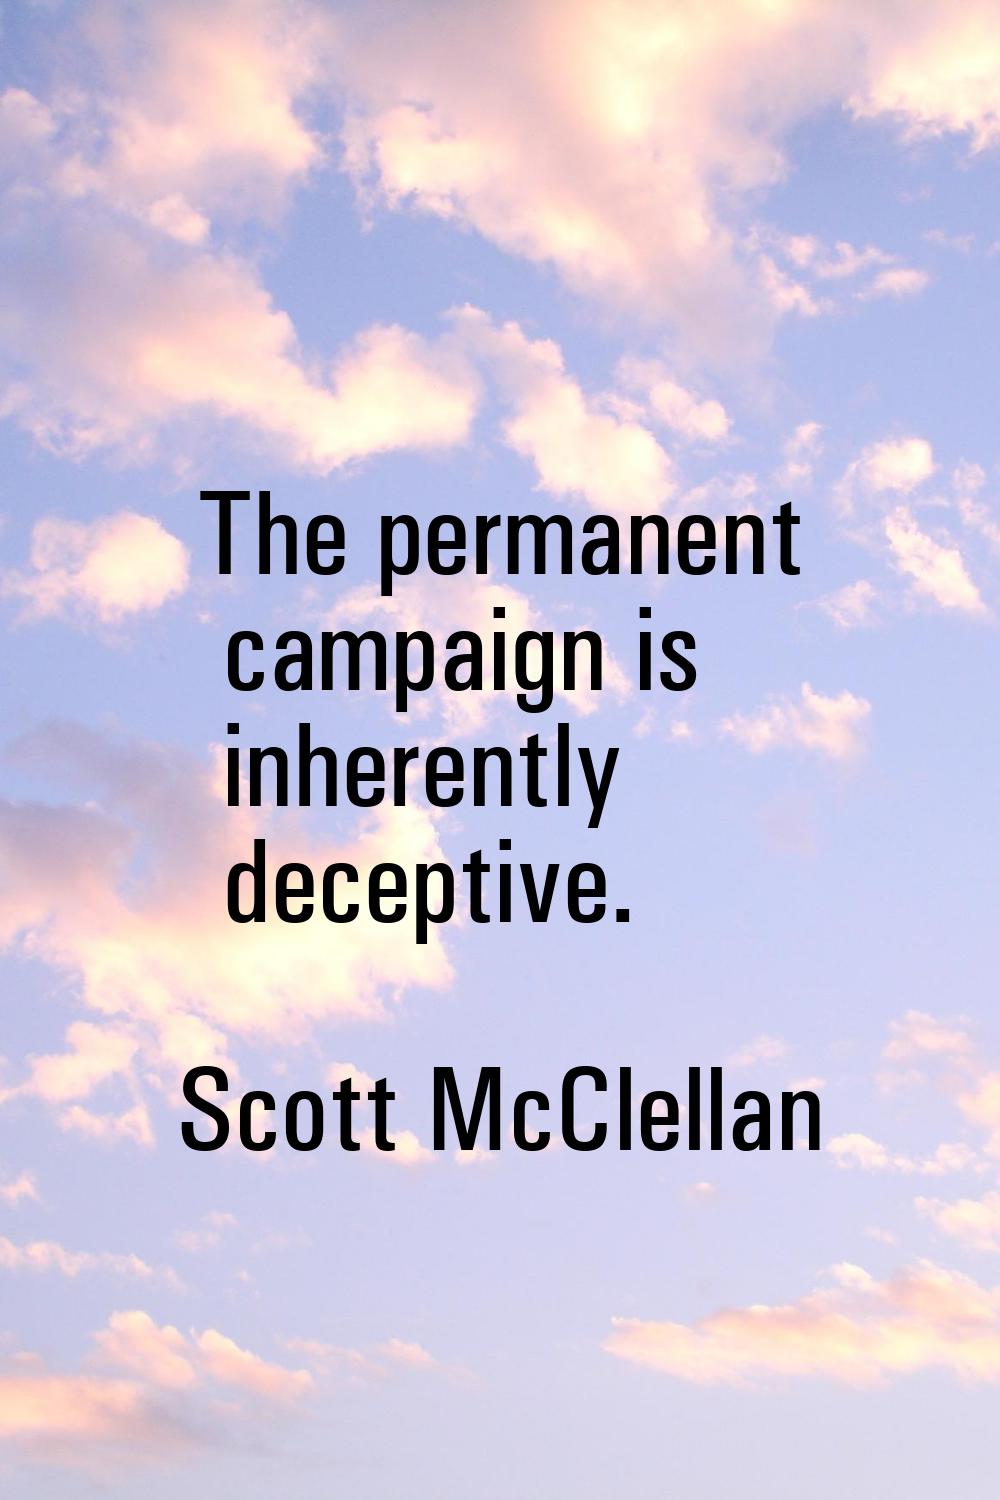 The permanent campaign is inherently deceptive.